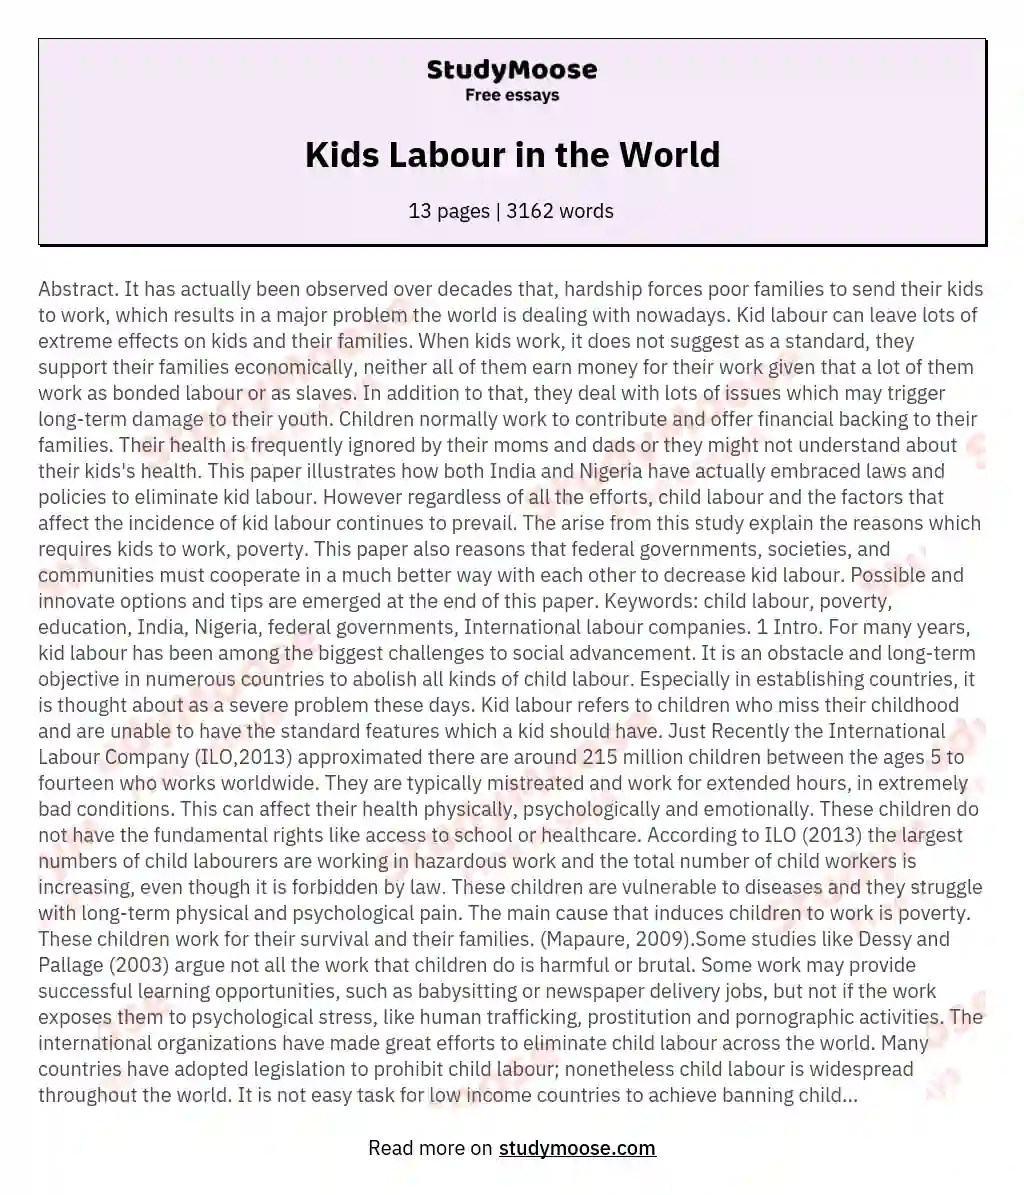 Kids Labour in the World essay